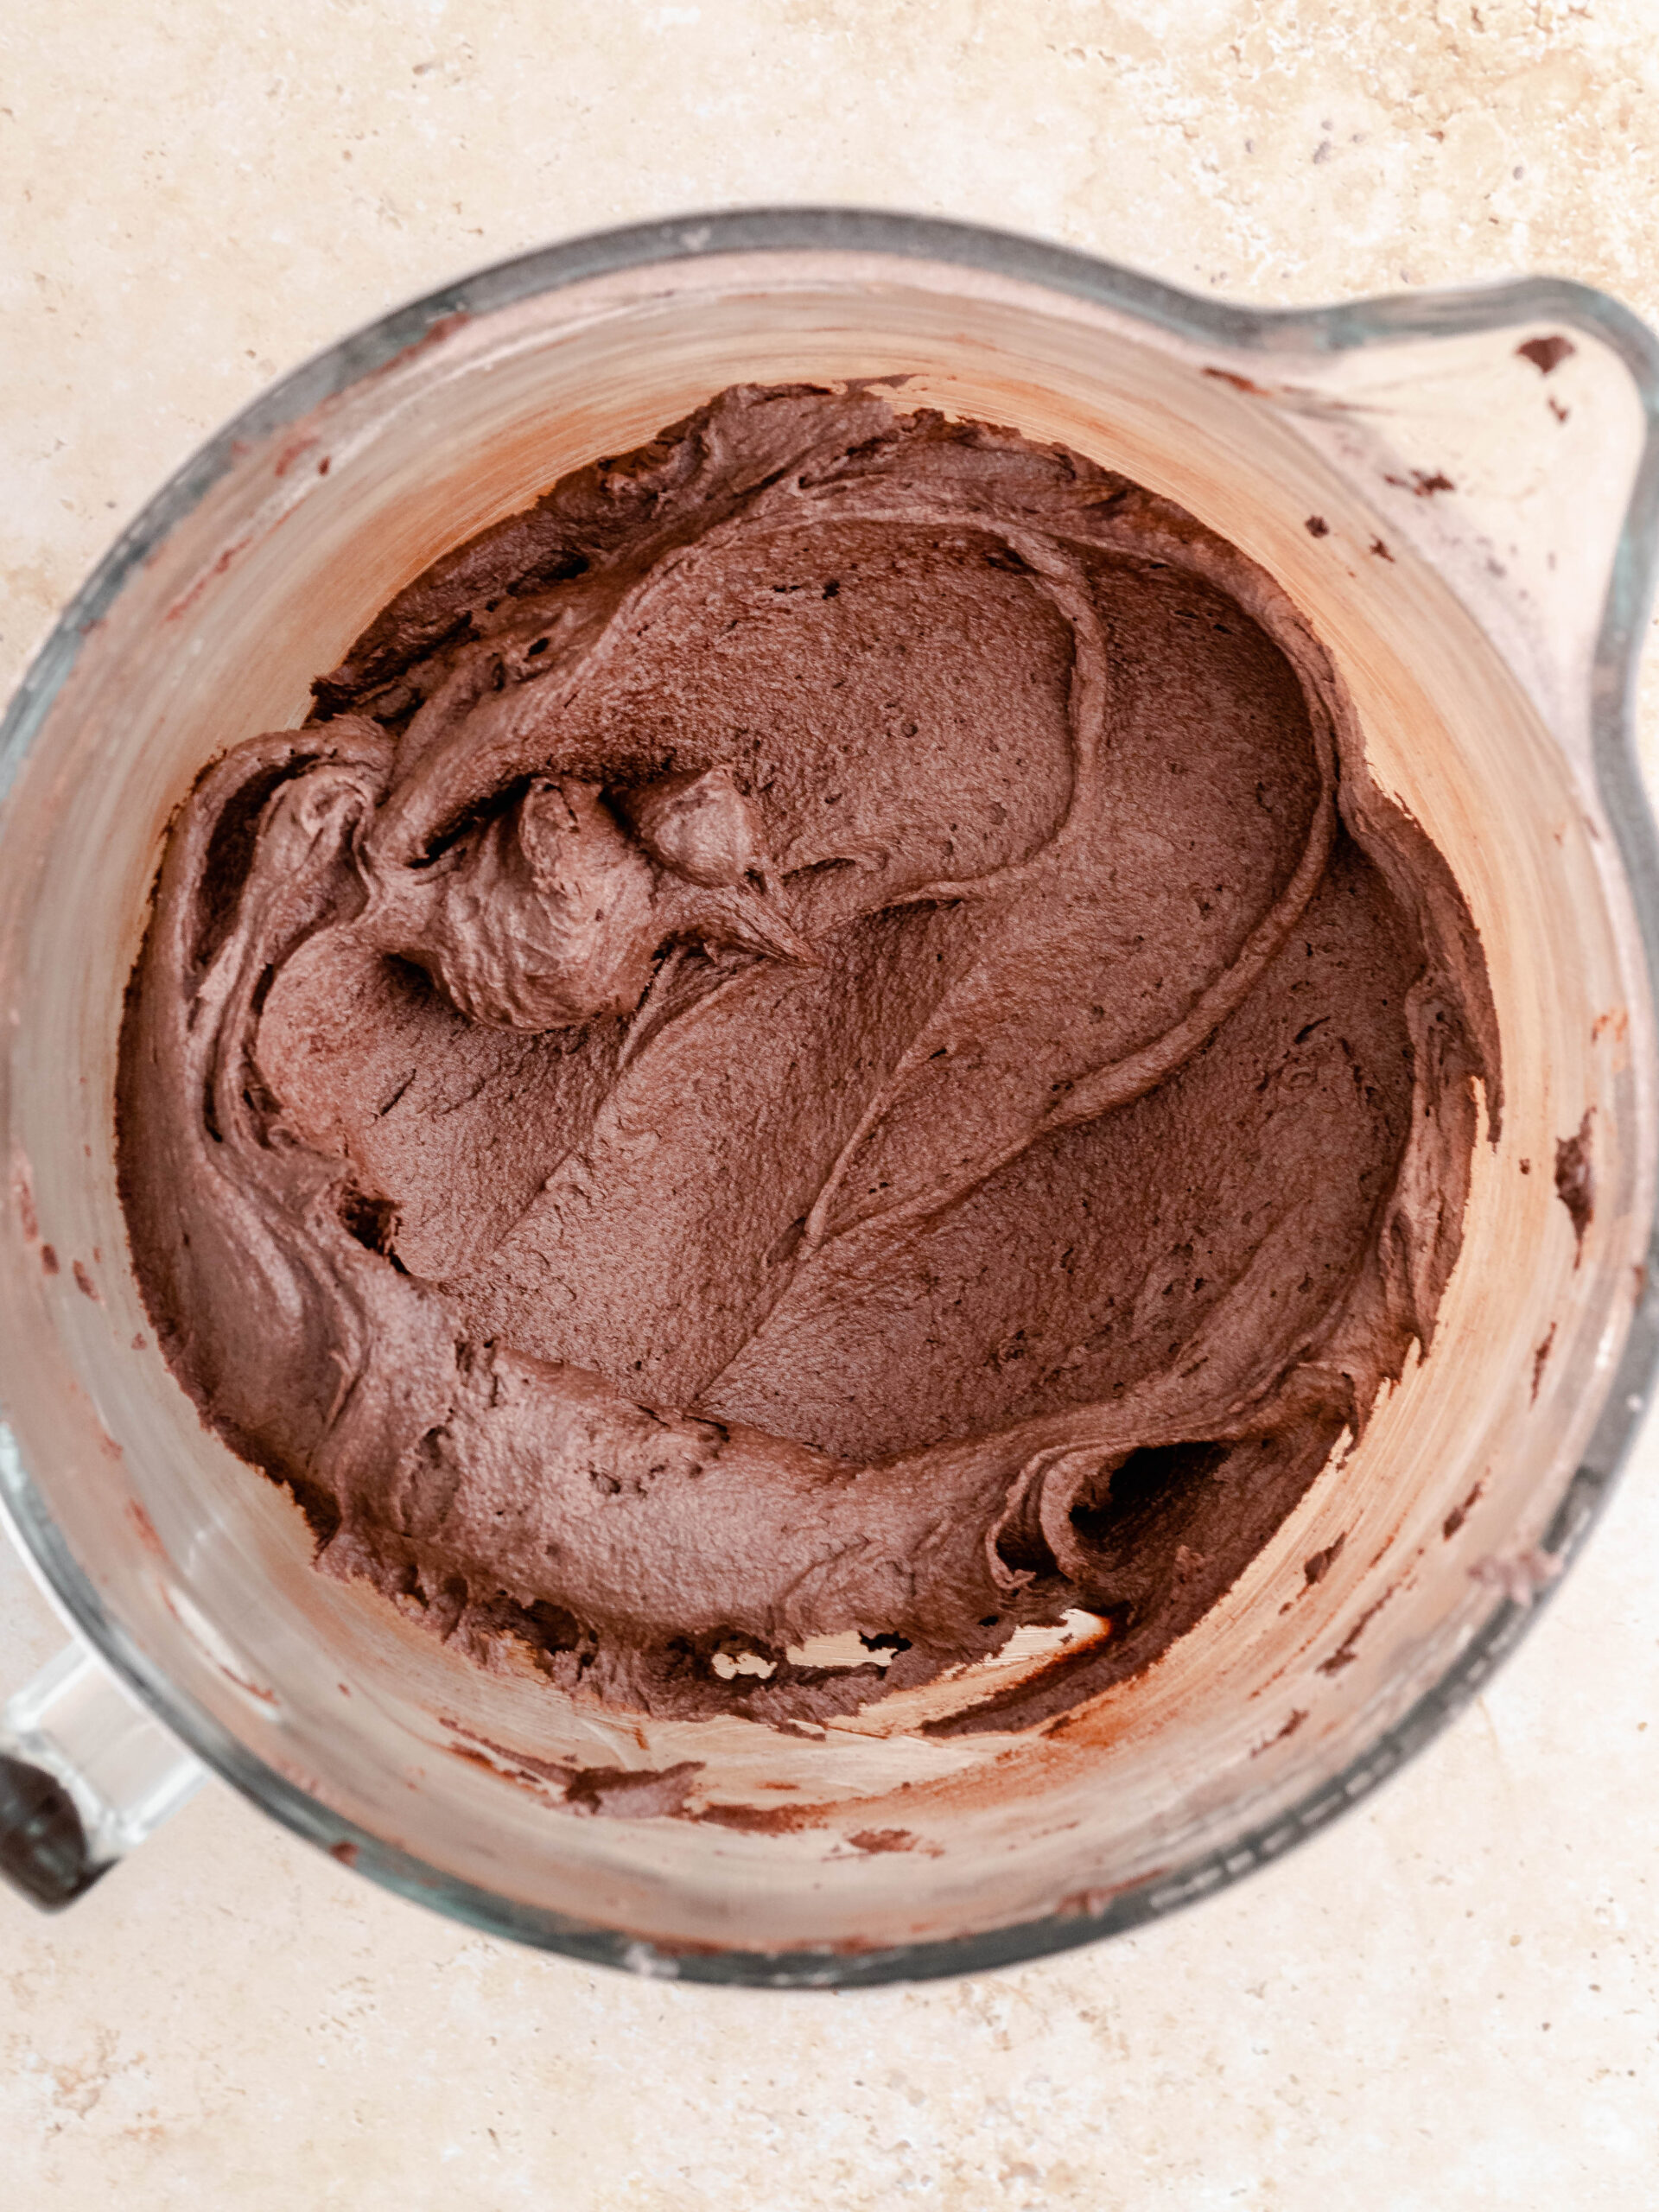 Chocolate buttercream in a mixing bowl.